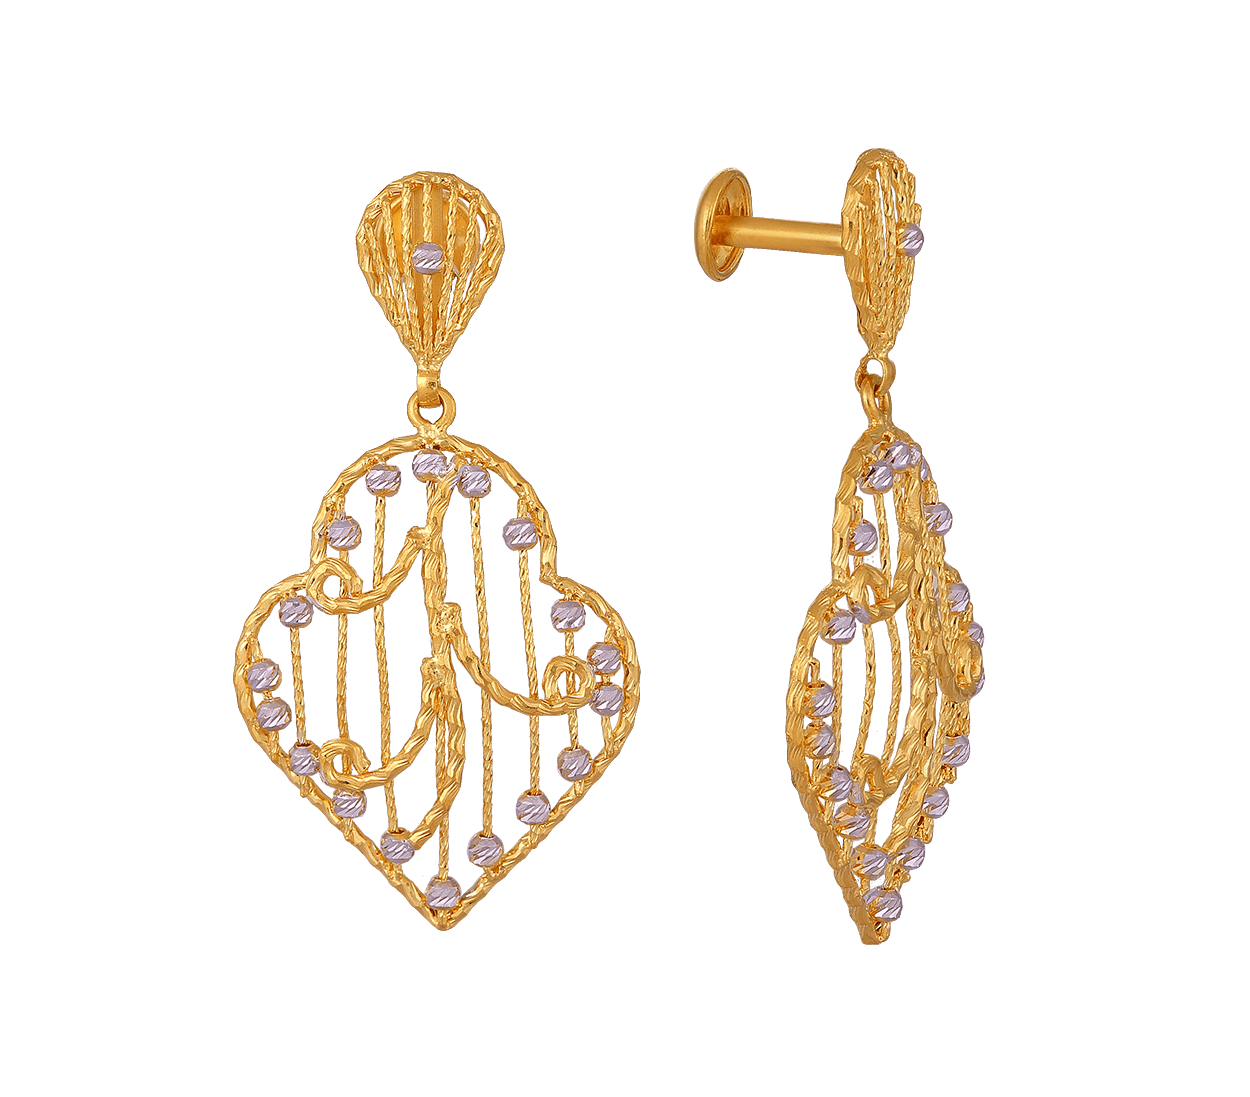 Buy quality 916 gold new design earrings in Ahmedabad